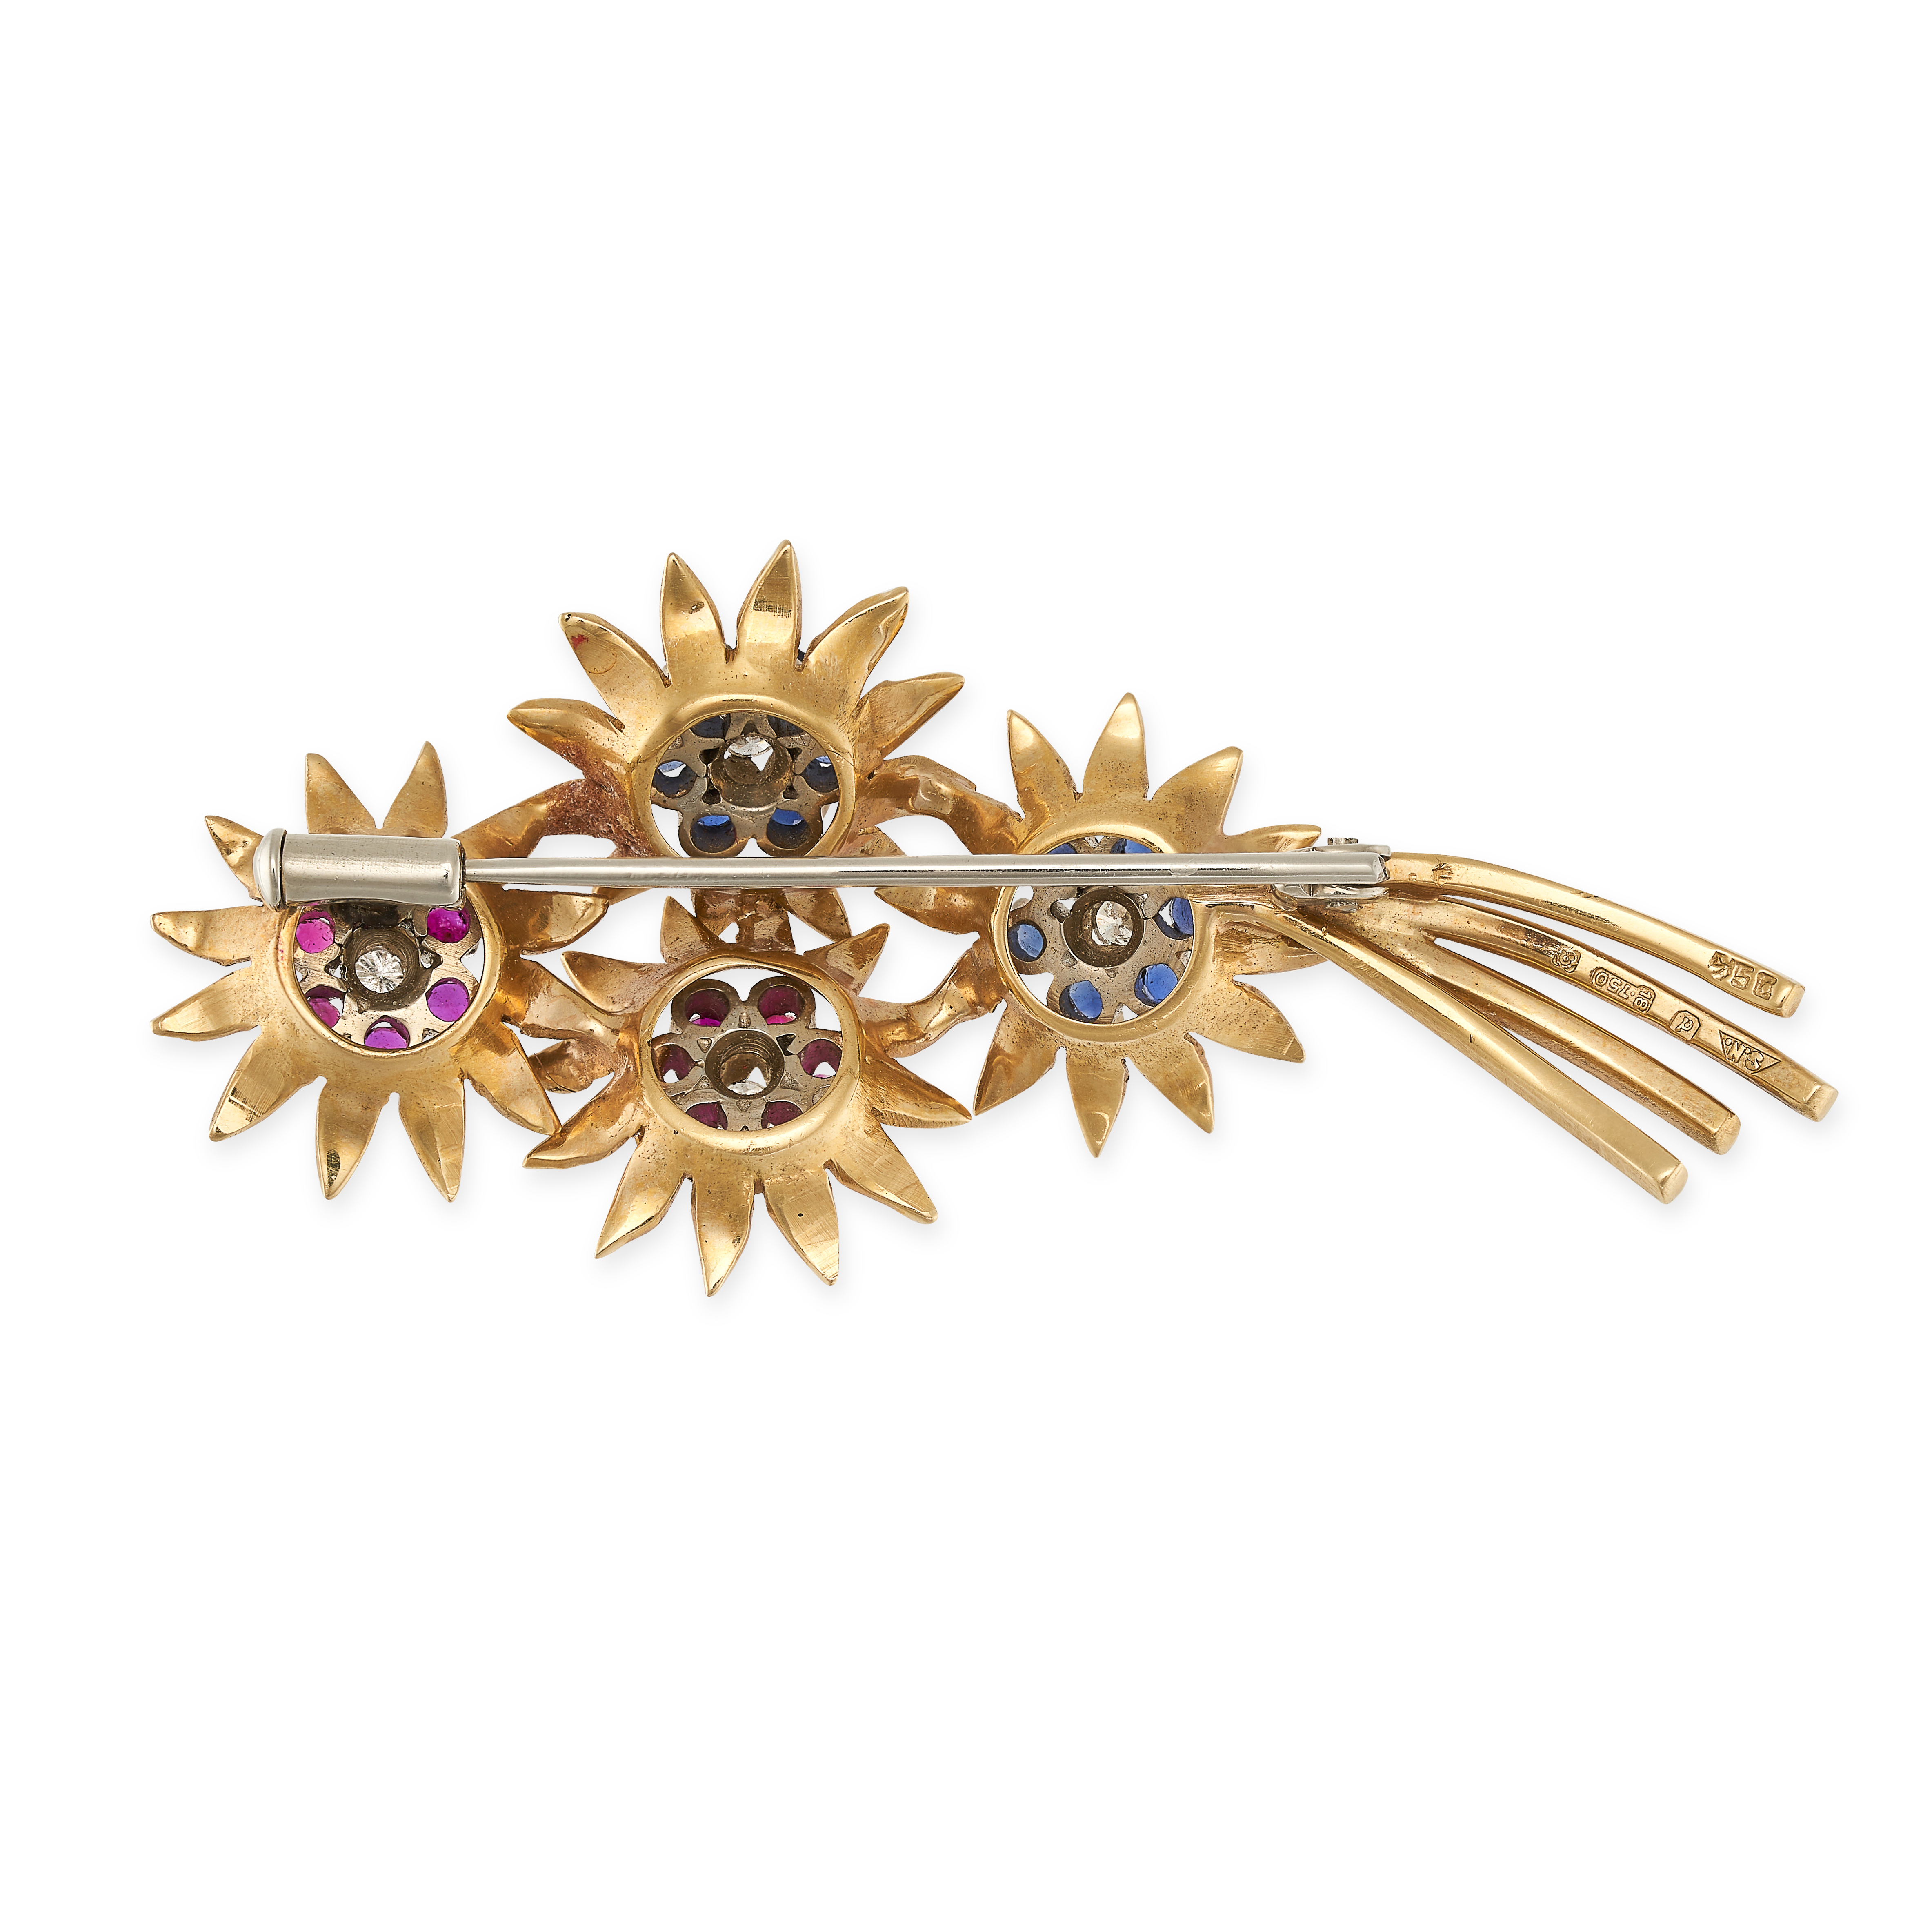 NO RESERVE - A VINTAGE GEMSET FLOWER SPRAY BROOCH in 18ct yellow gold, designed as a bouquet of - Image 2 of 2